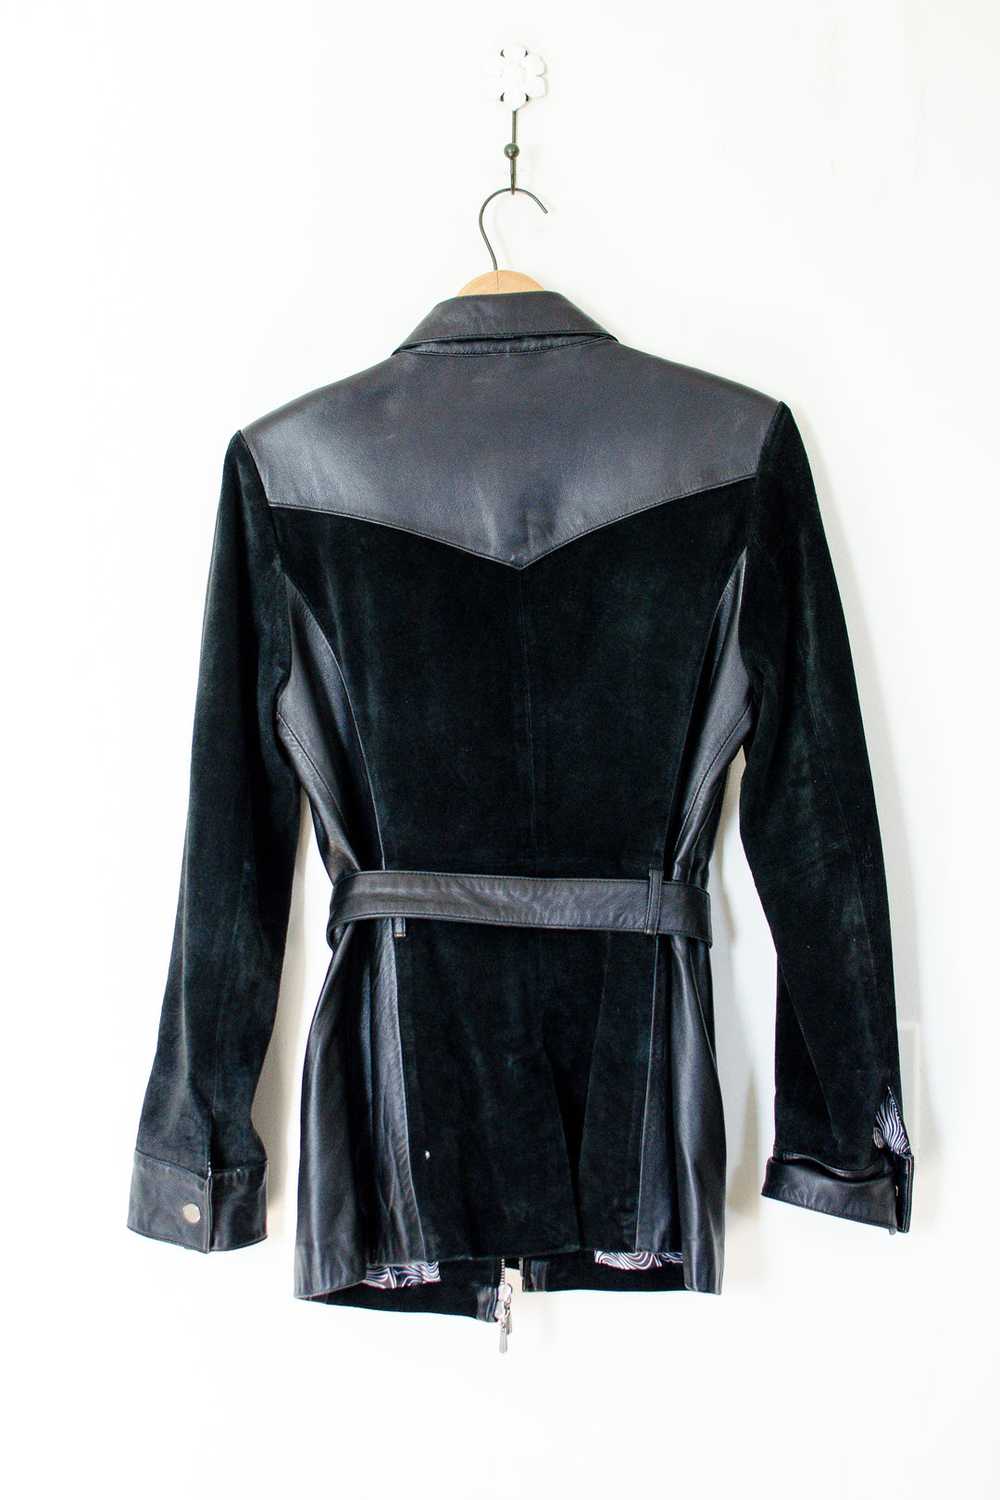 1990s Black Leather & Suede Belted Jacket / Small - image 9